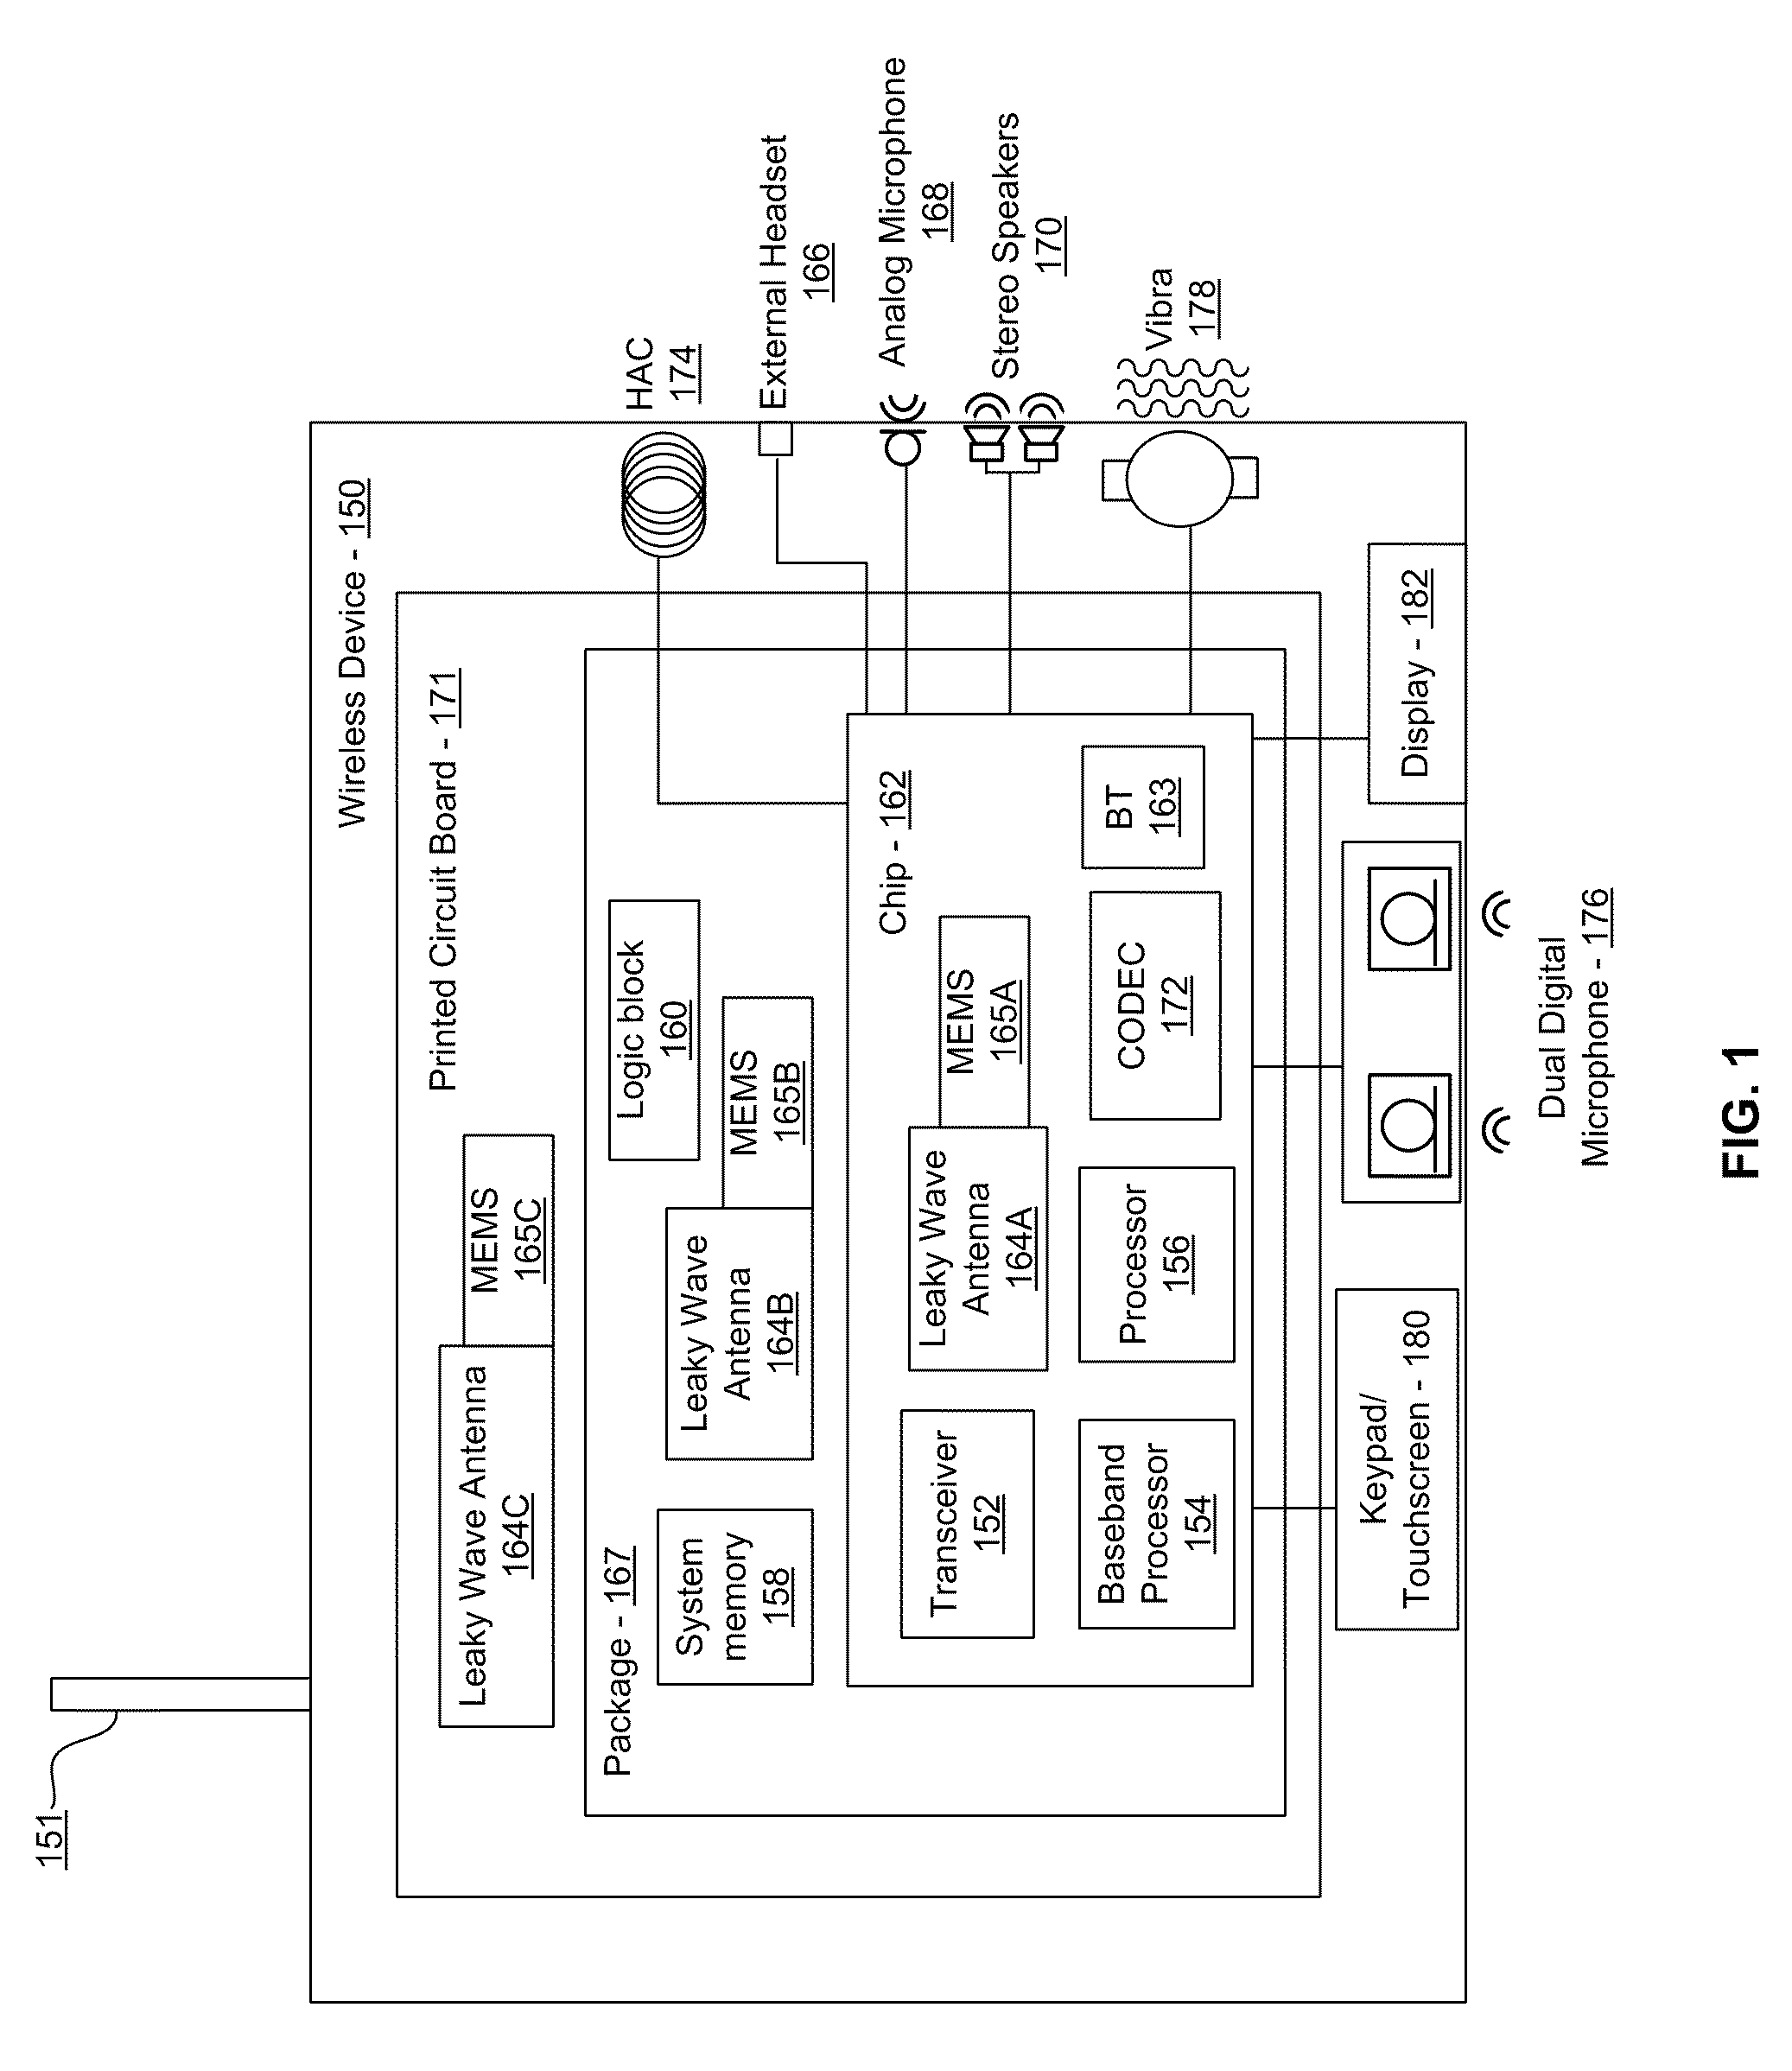 Method and system for configuring a leaky wave antenna utilizing micro-electro mechanical systems